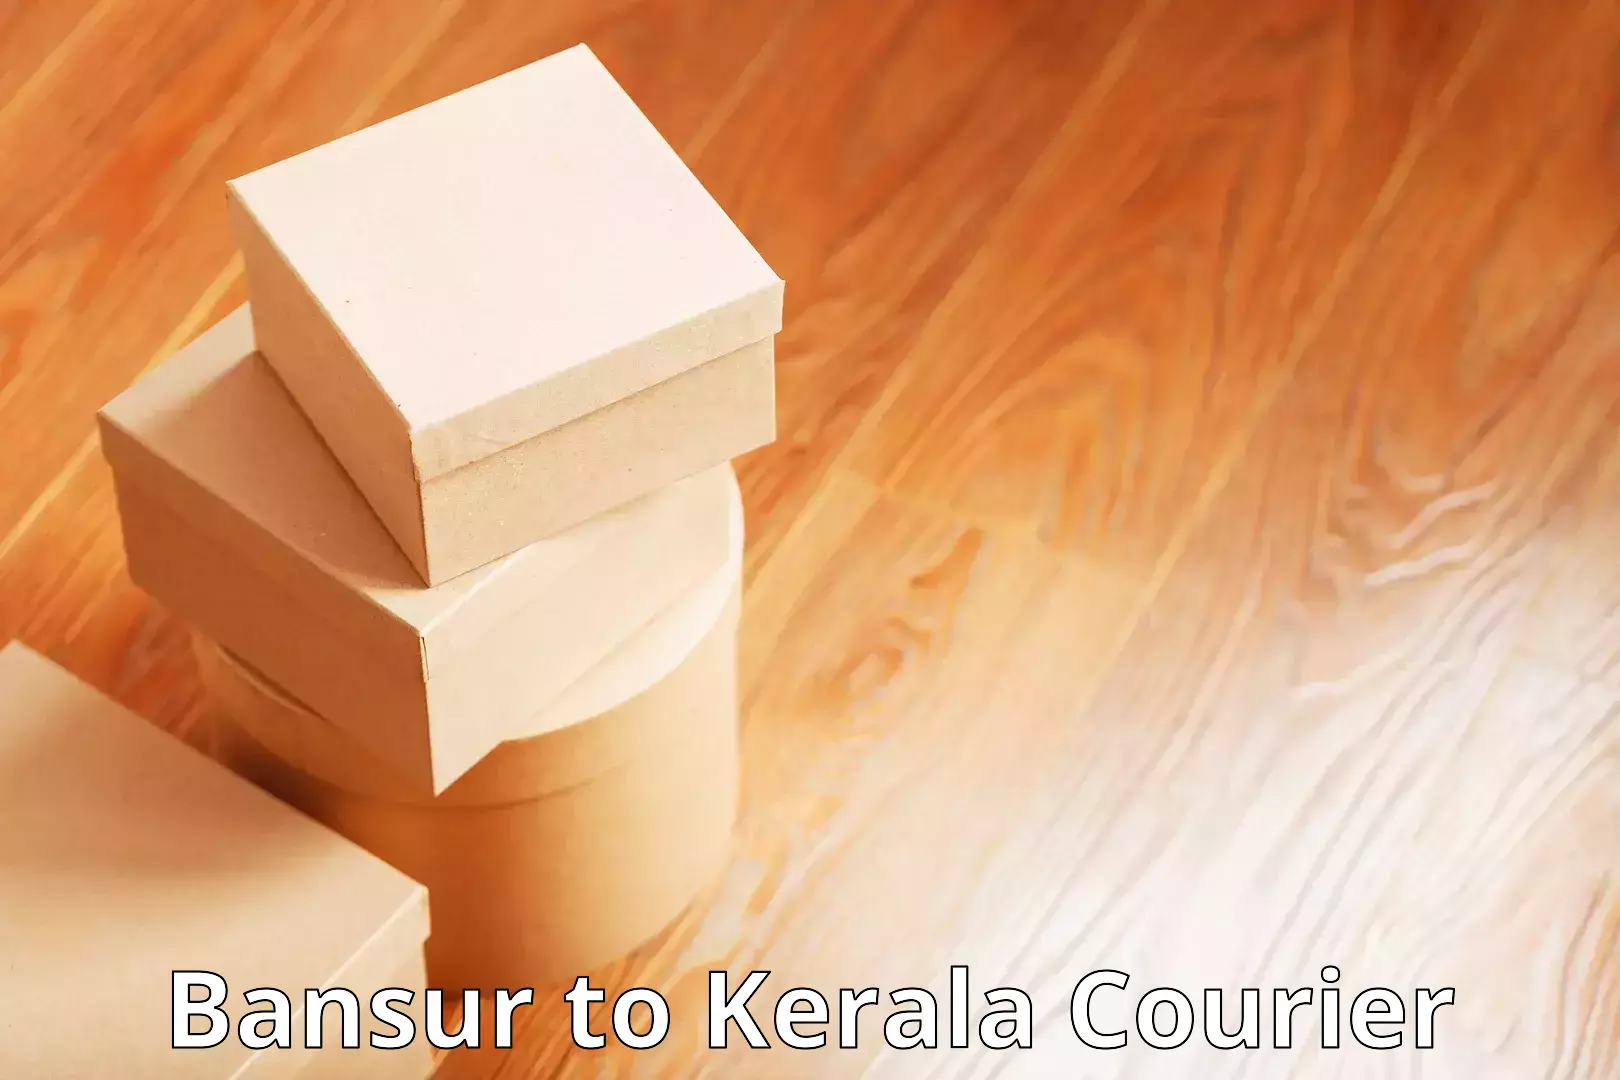 Full-service courier options Bansur to Kerala